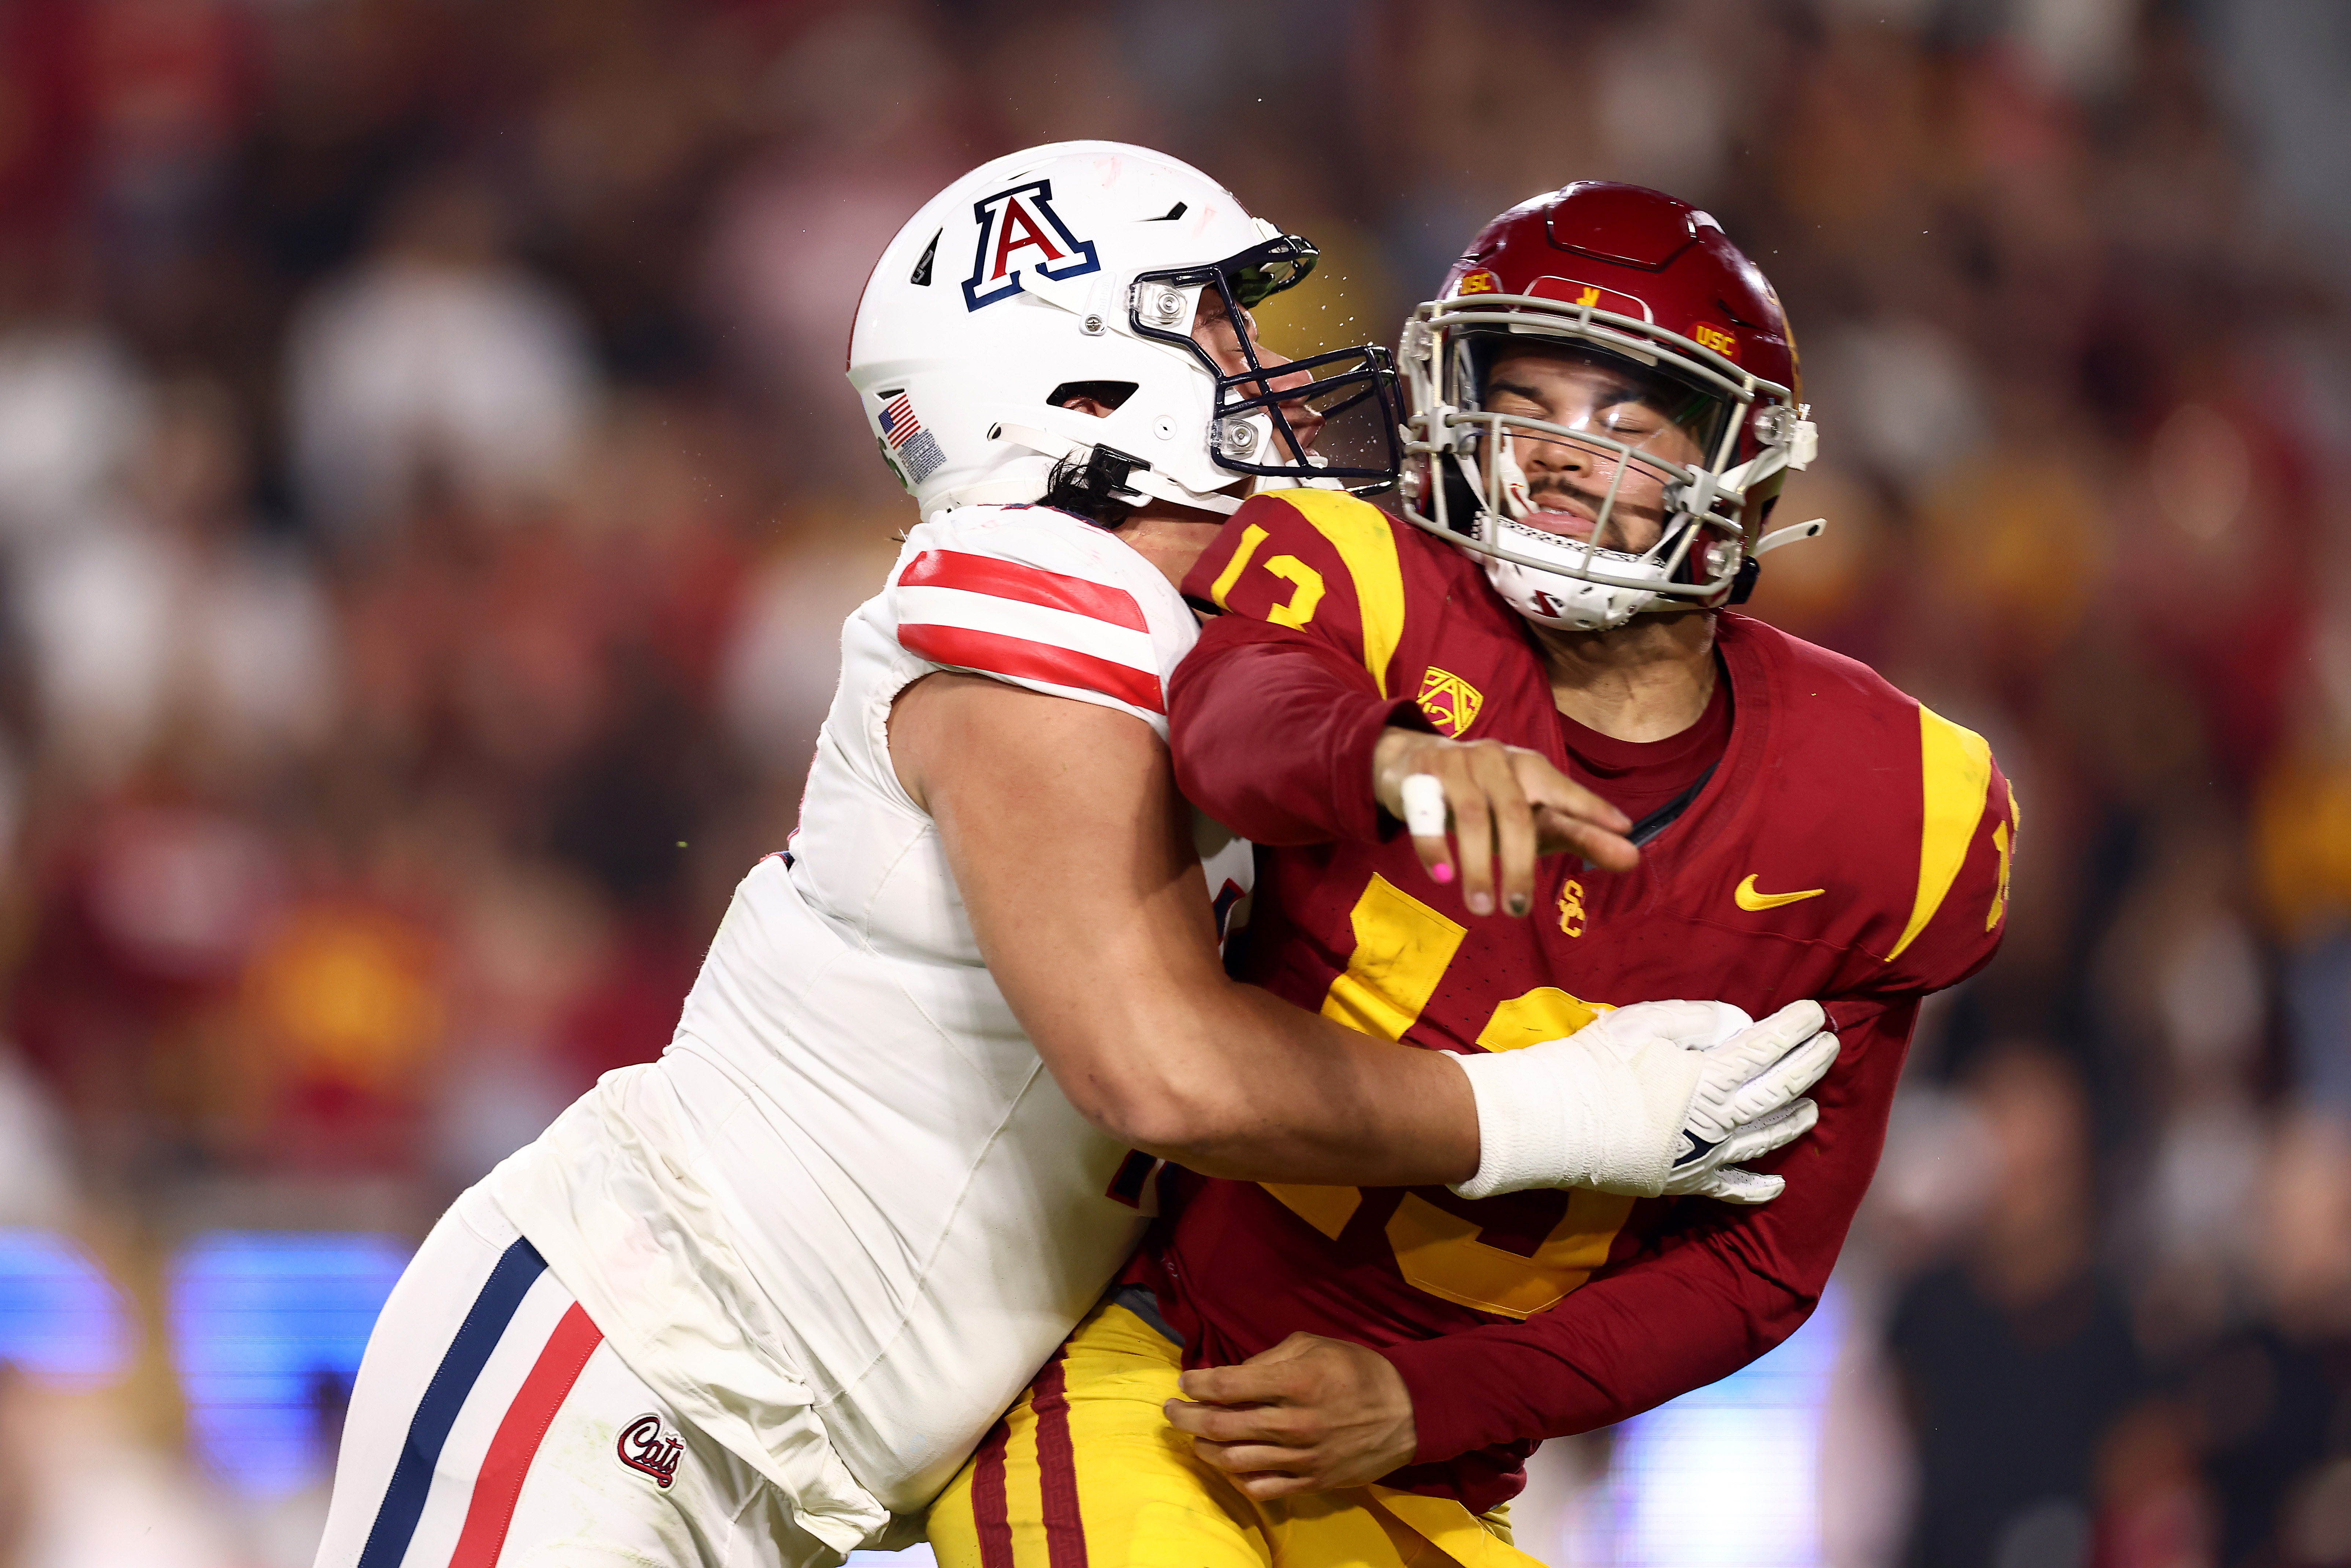 Pac-12 Power Rankings: USC drops once again after 3OT escape vs. Arizona